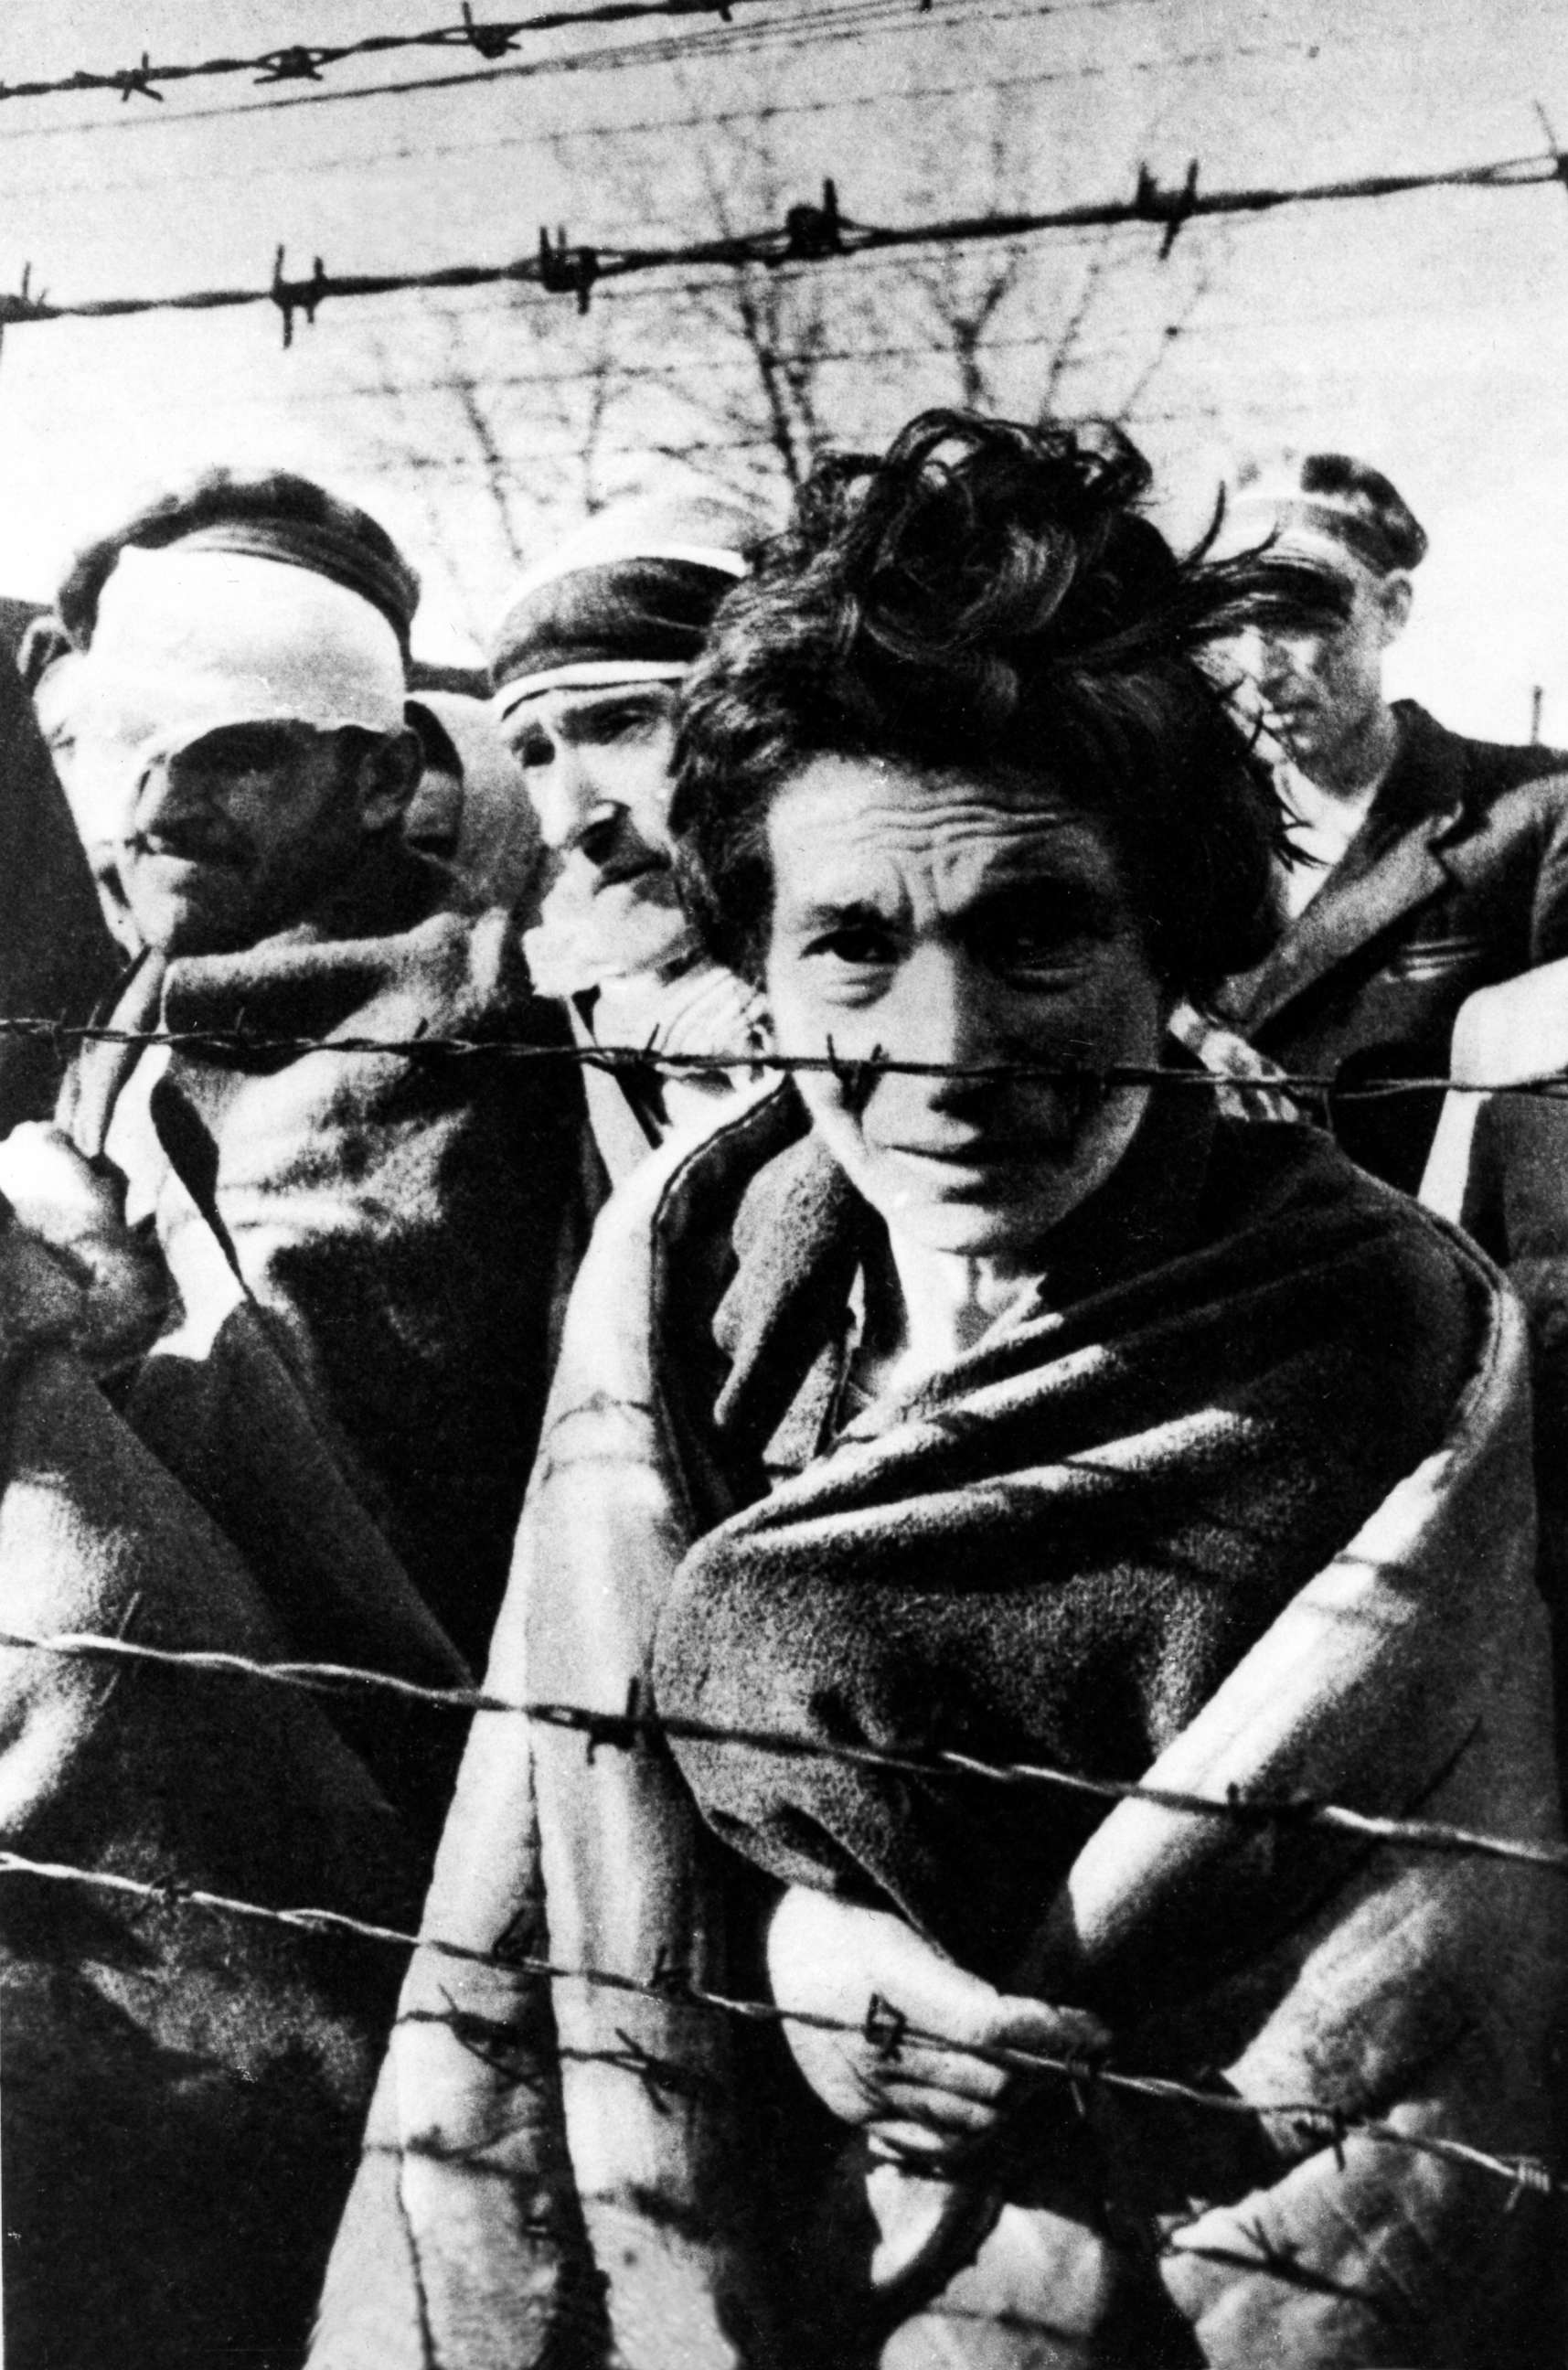 PHOTO: A few of the survivors of Auschwitz stand near a fence during the arrival of the Soviet Army on Jan. 27, 1945.